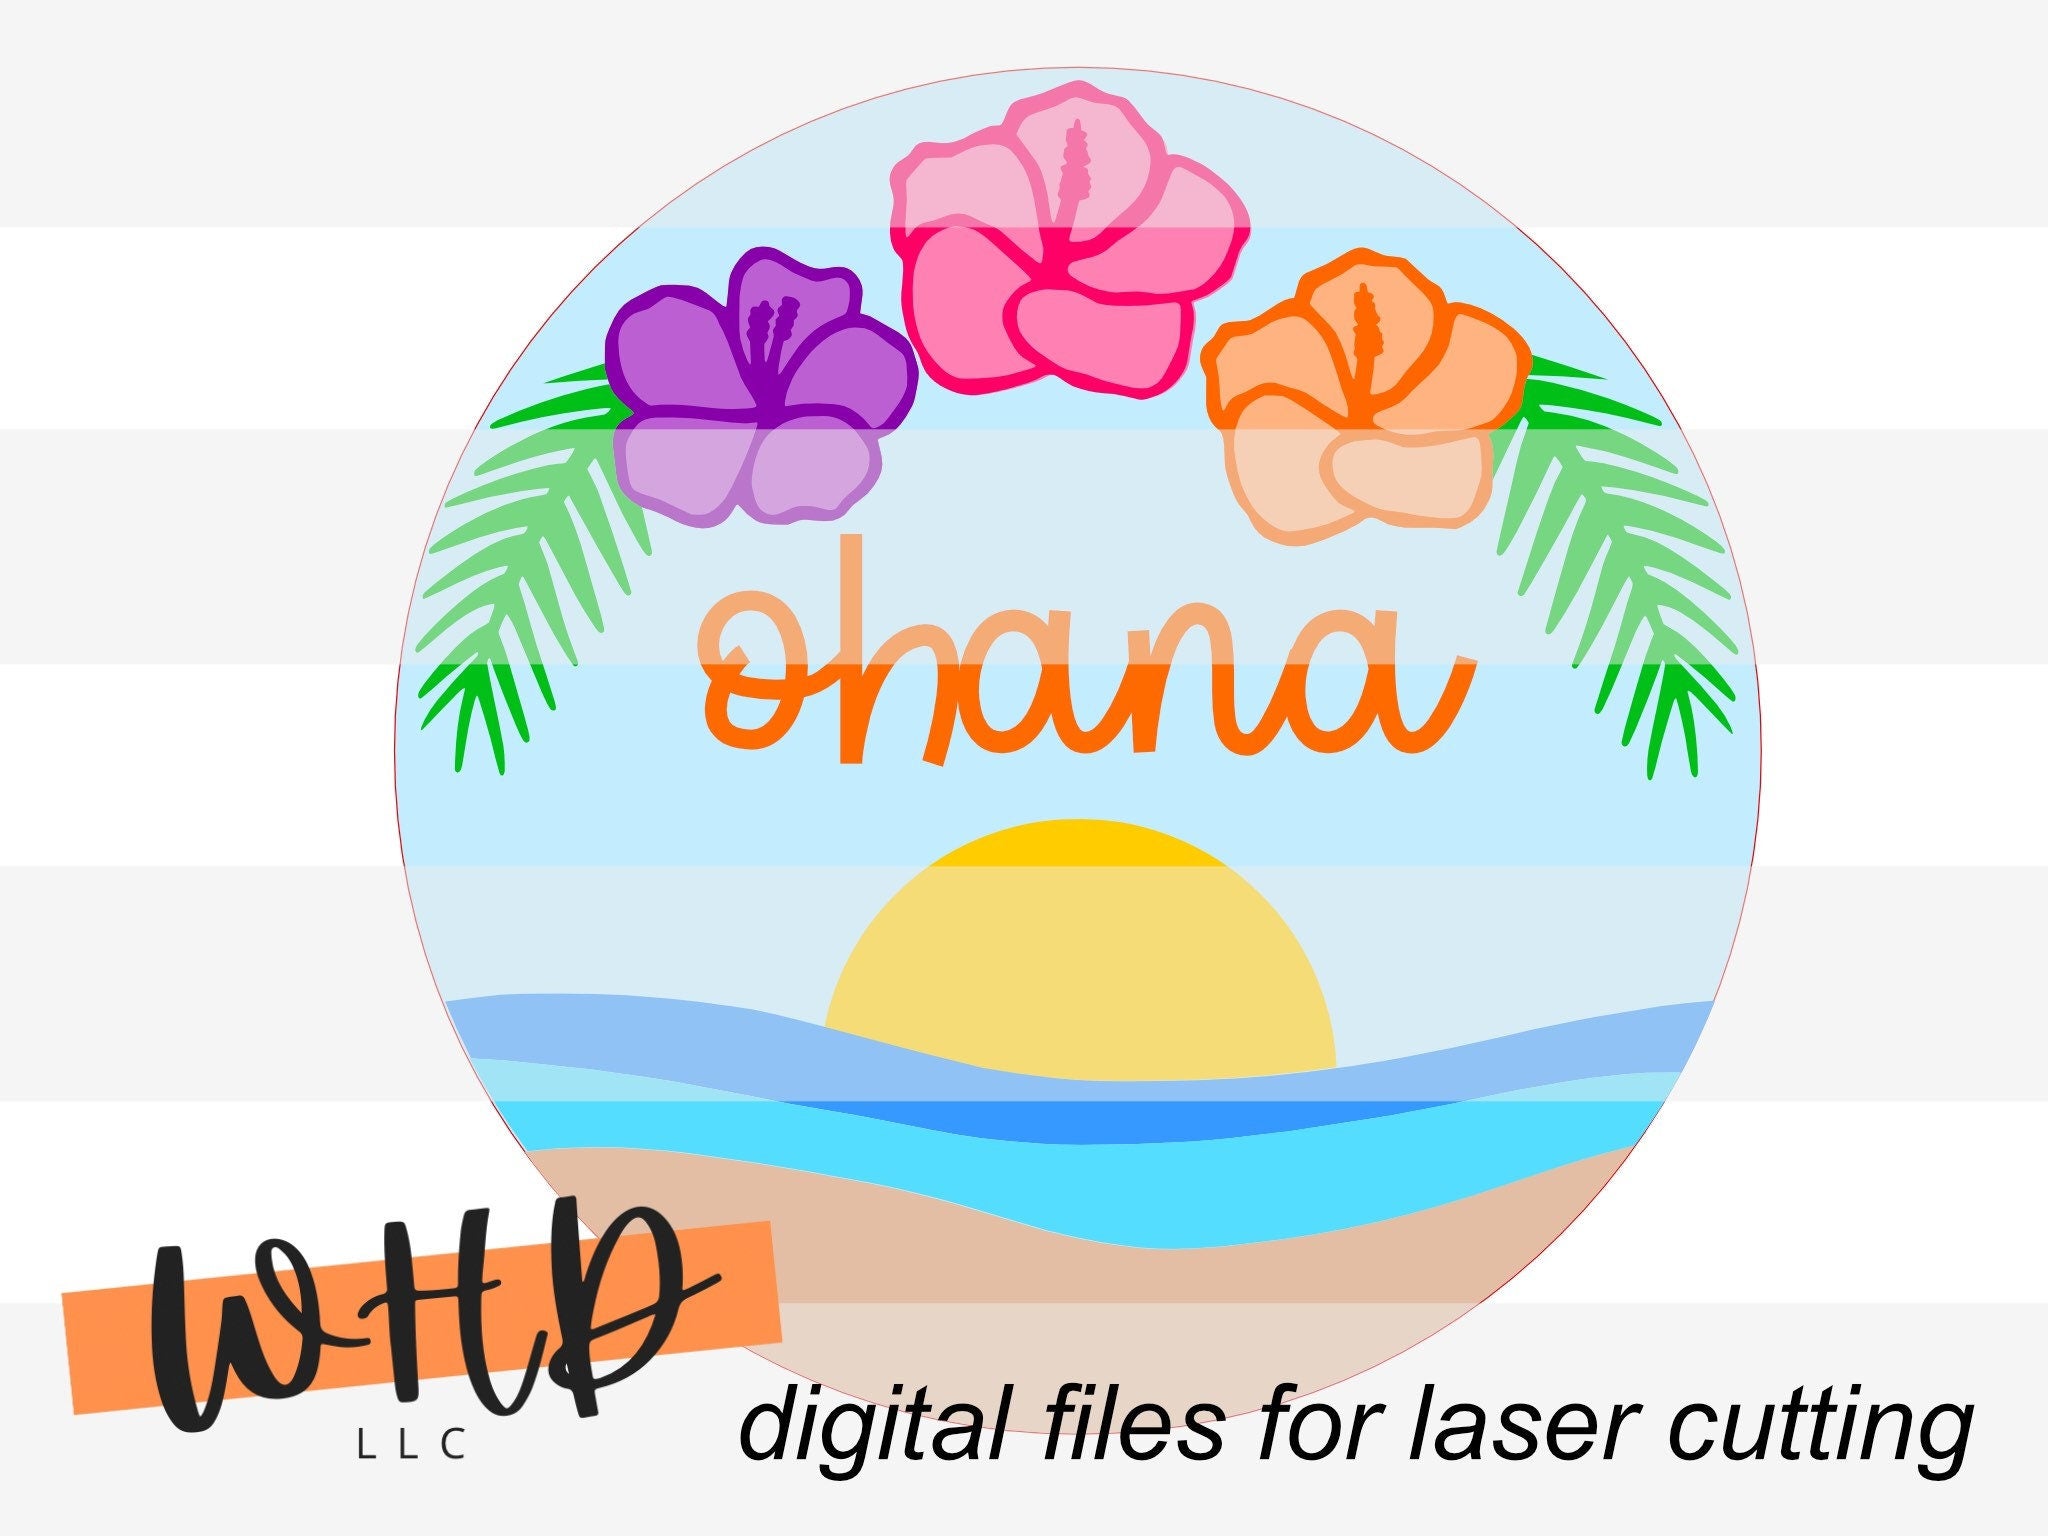 DIGITAL FILE - Ohana Hibiscus Sunset - Summer Tropical Floral Round - Files for Sign Making - SVG Cut File For Glowforge